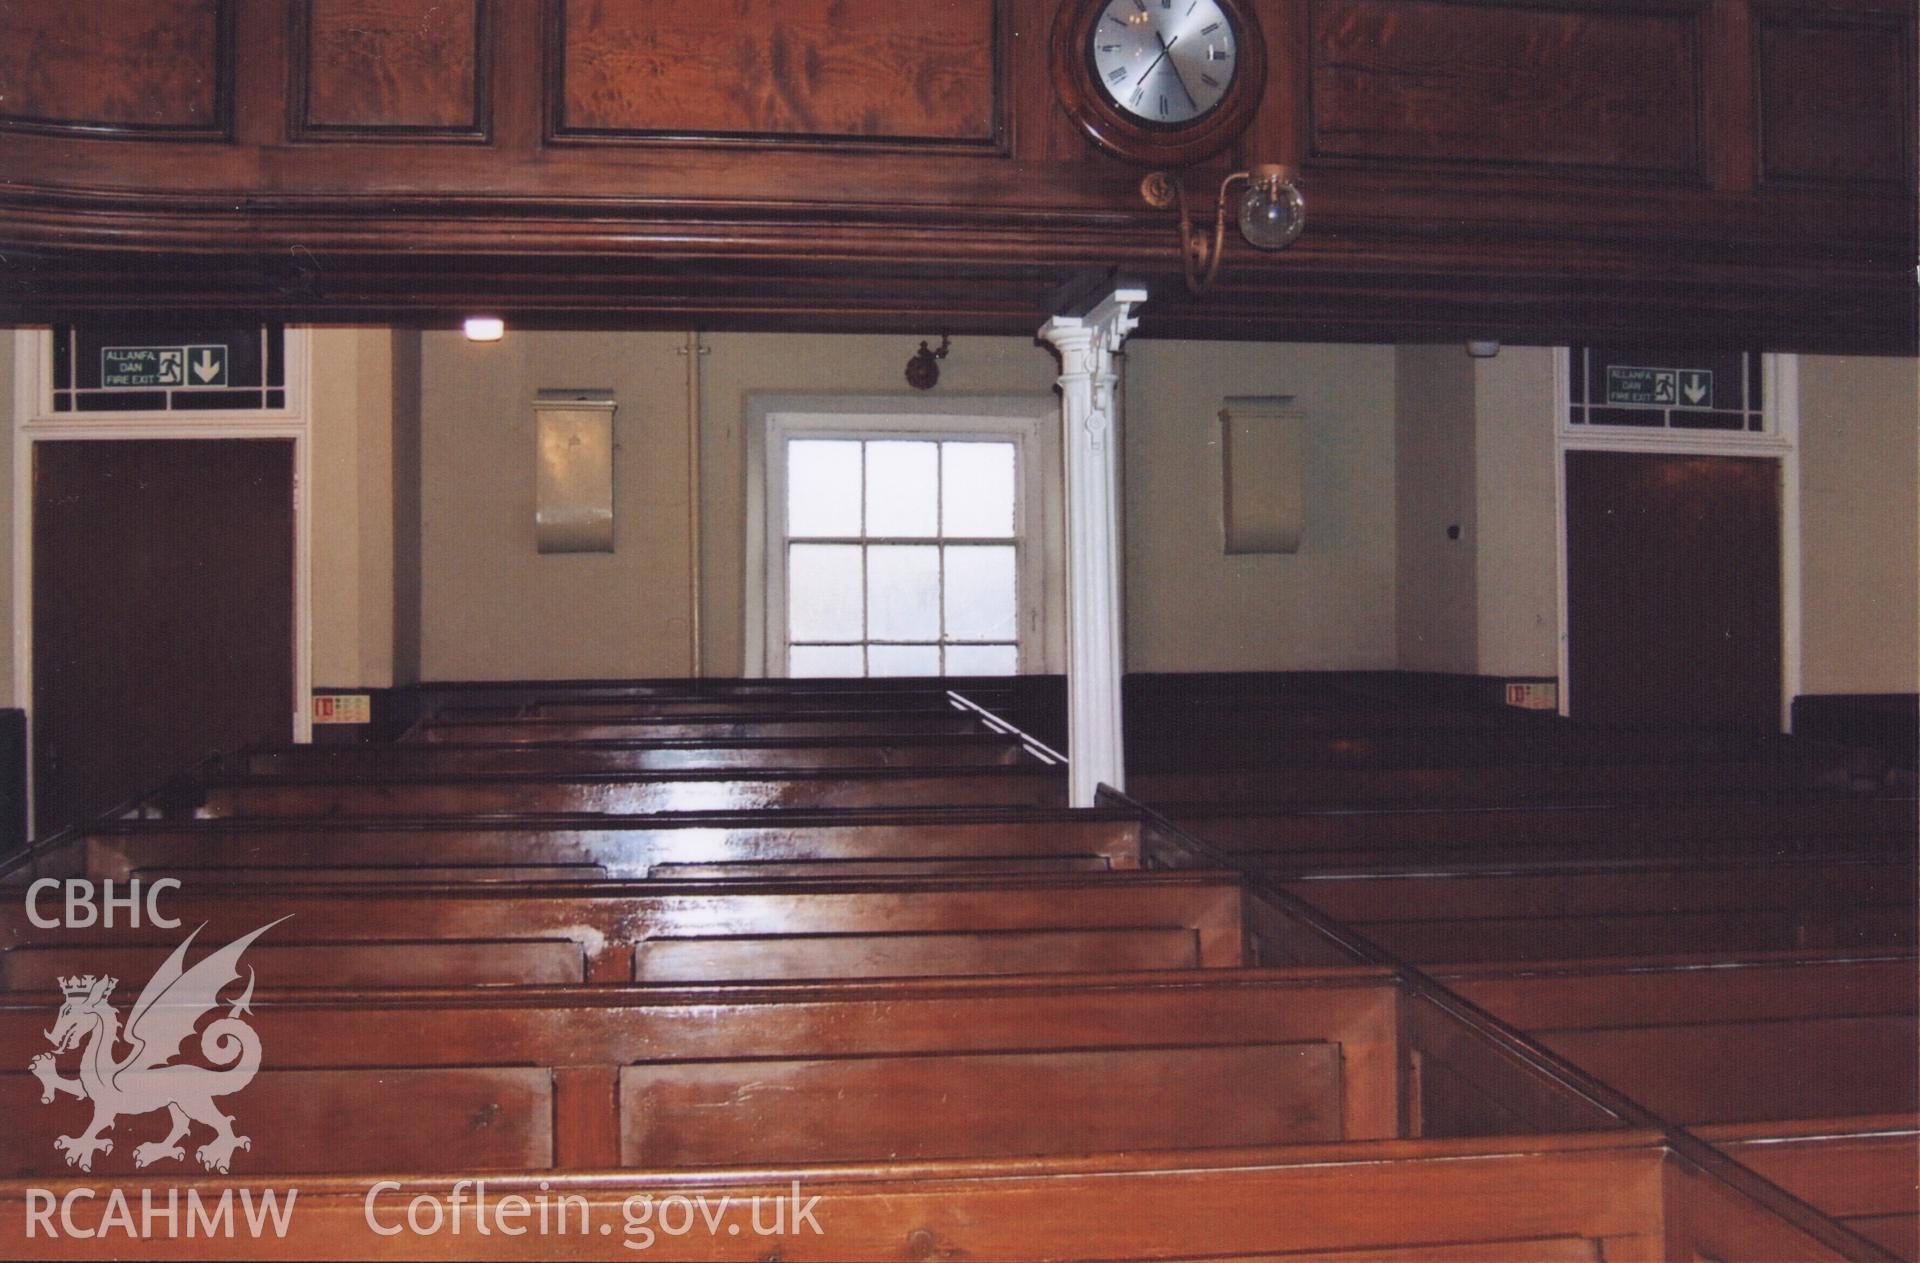 Colour photograph of the interior of the chapel, December 2006. Donated as part of the Digital Dissent Project.